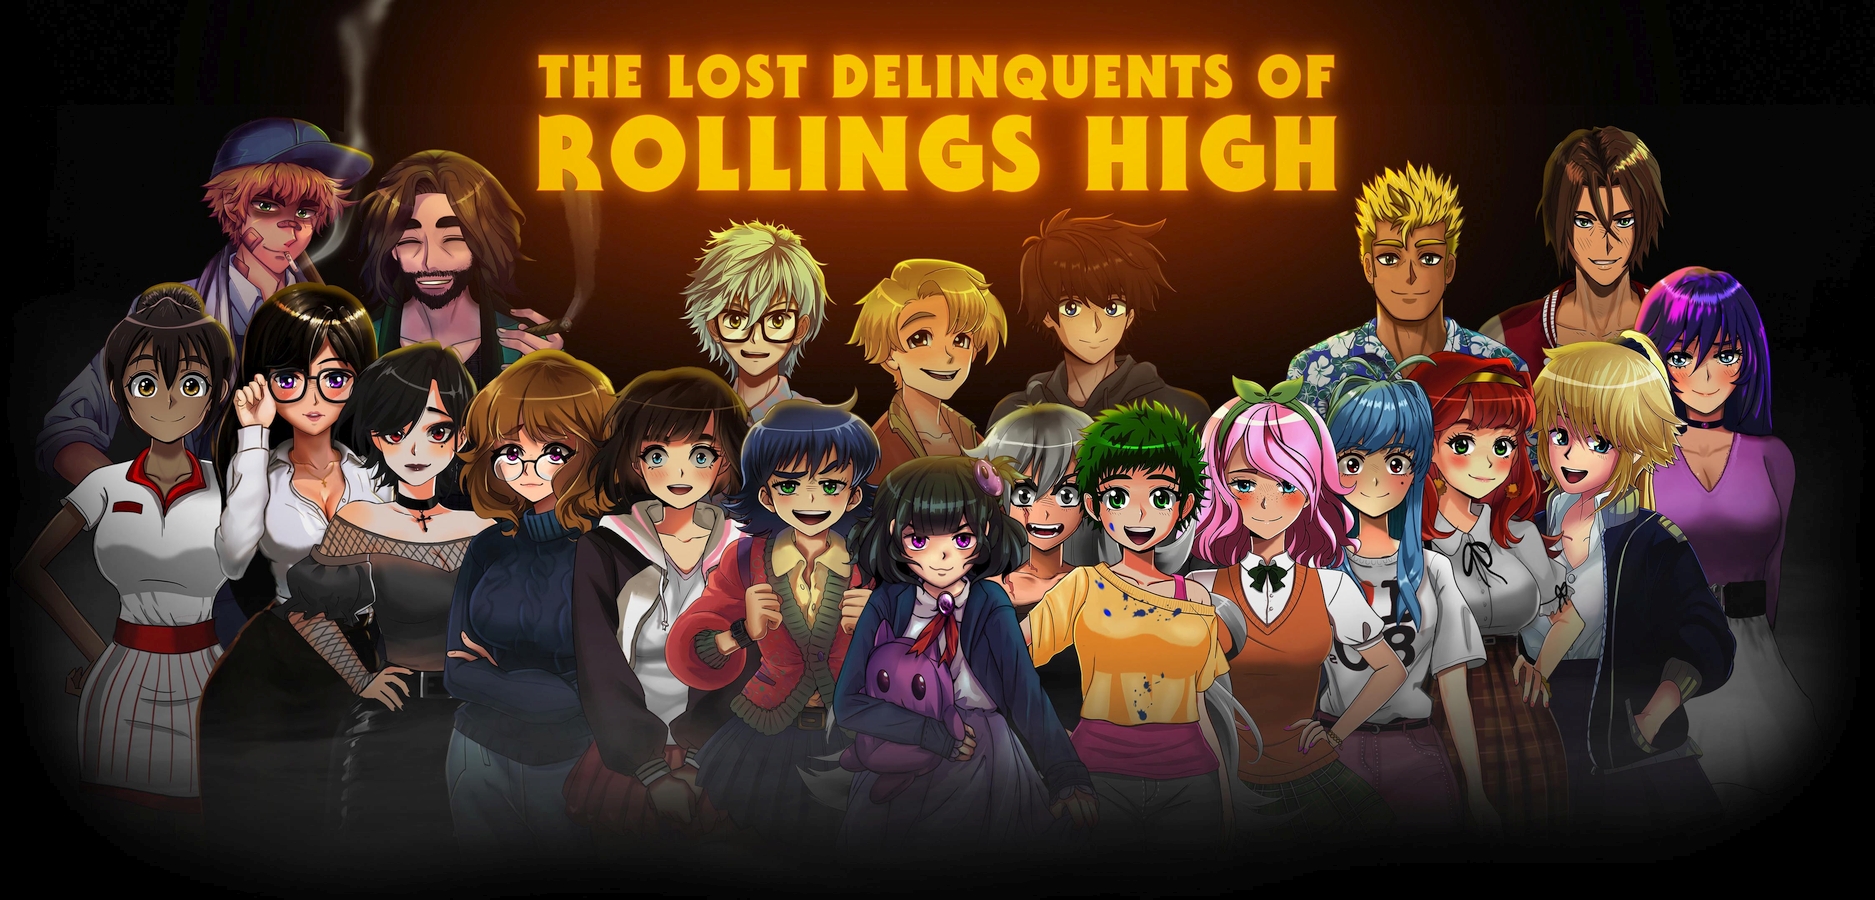 The Lost Delinquents of Rollings High Romance Horror Visual Novel Kickstarter Campaign Now Live